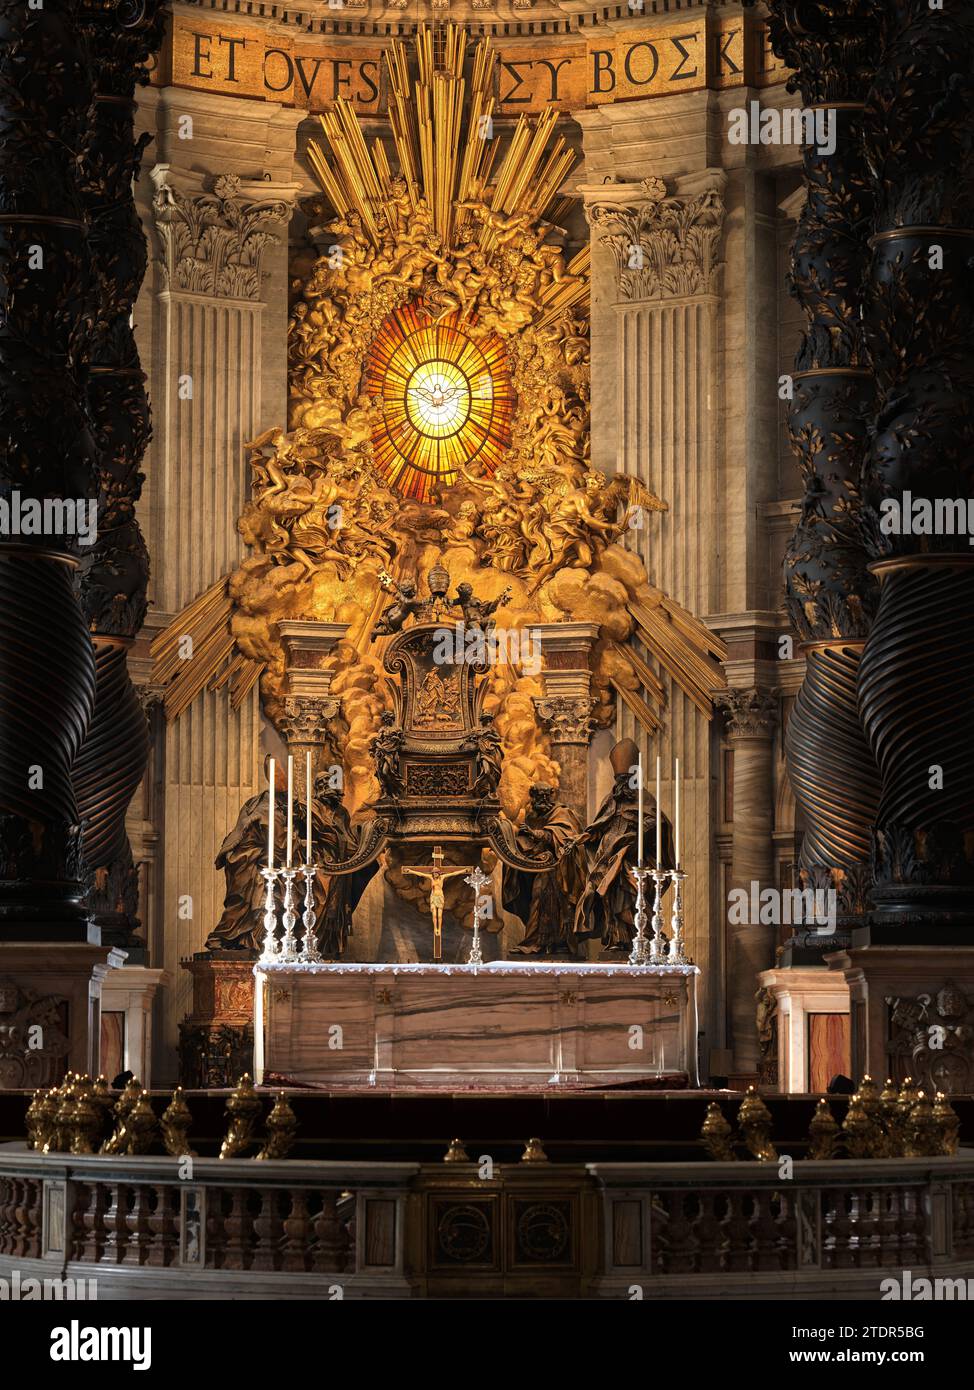 Dove, symbol of the Holy Spirit, over the cathedra Petri (chair of St Peter) in the apse of St Peter's basilica, Rome, Vatican, Italy. Stock Photo